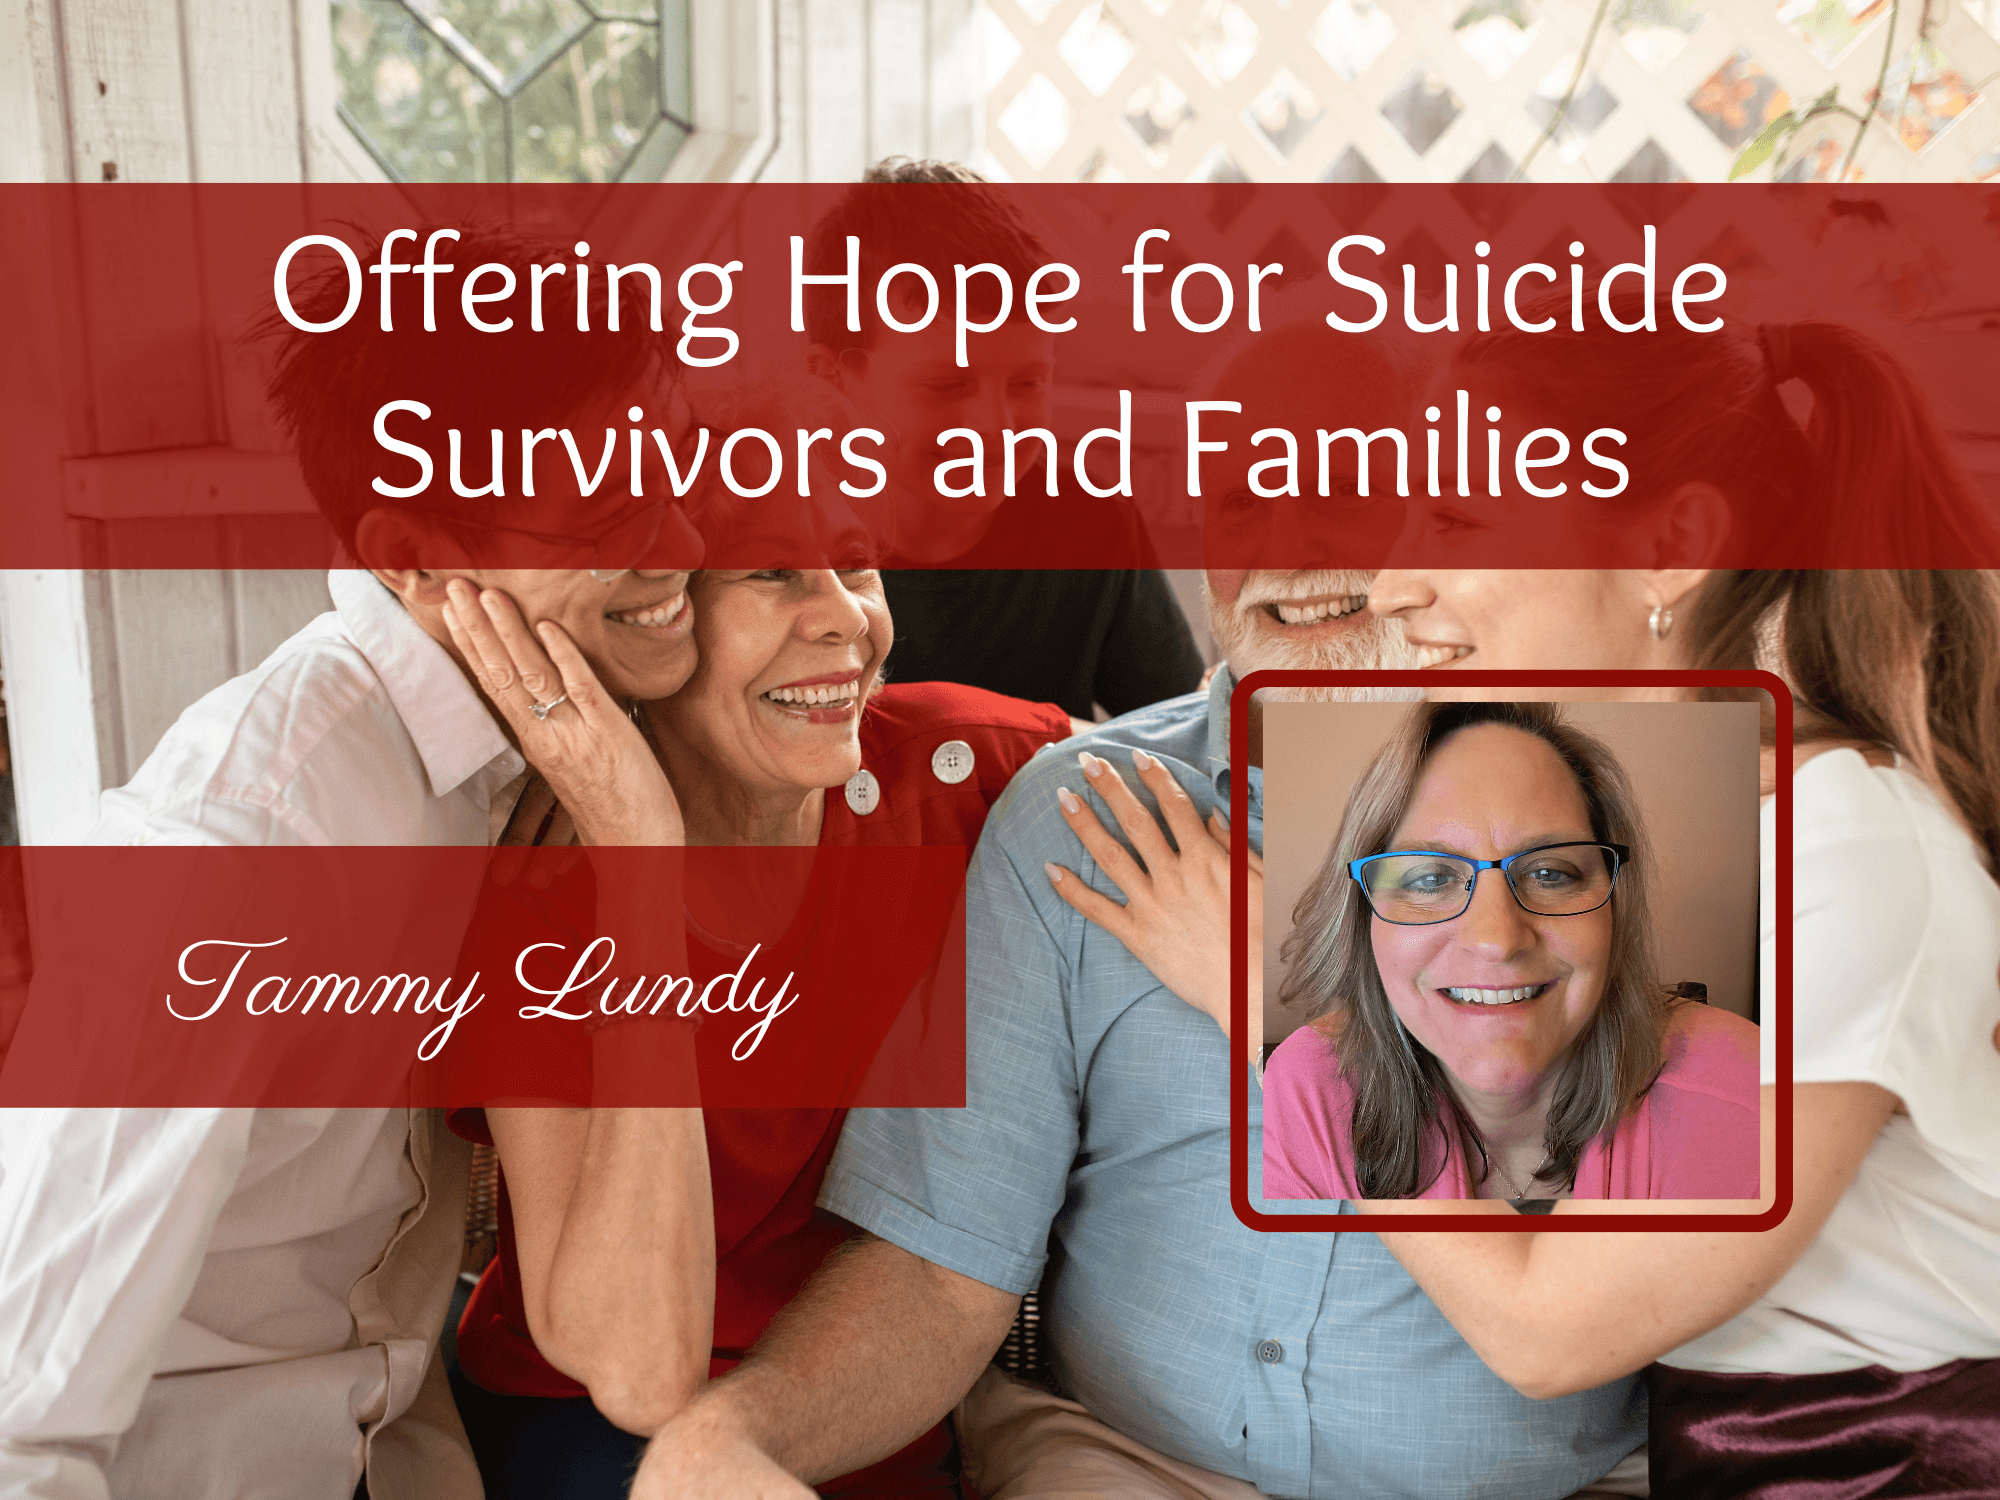 Offering Hope for Suicide Survivors and Families